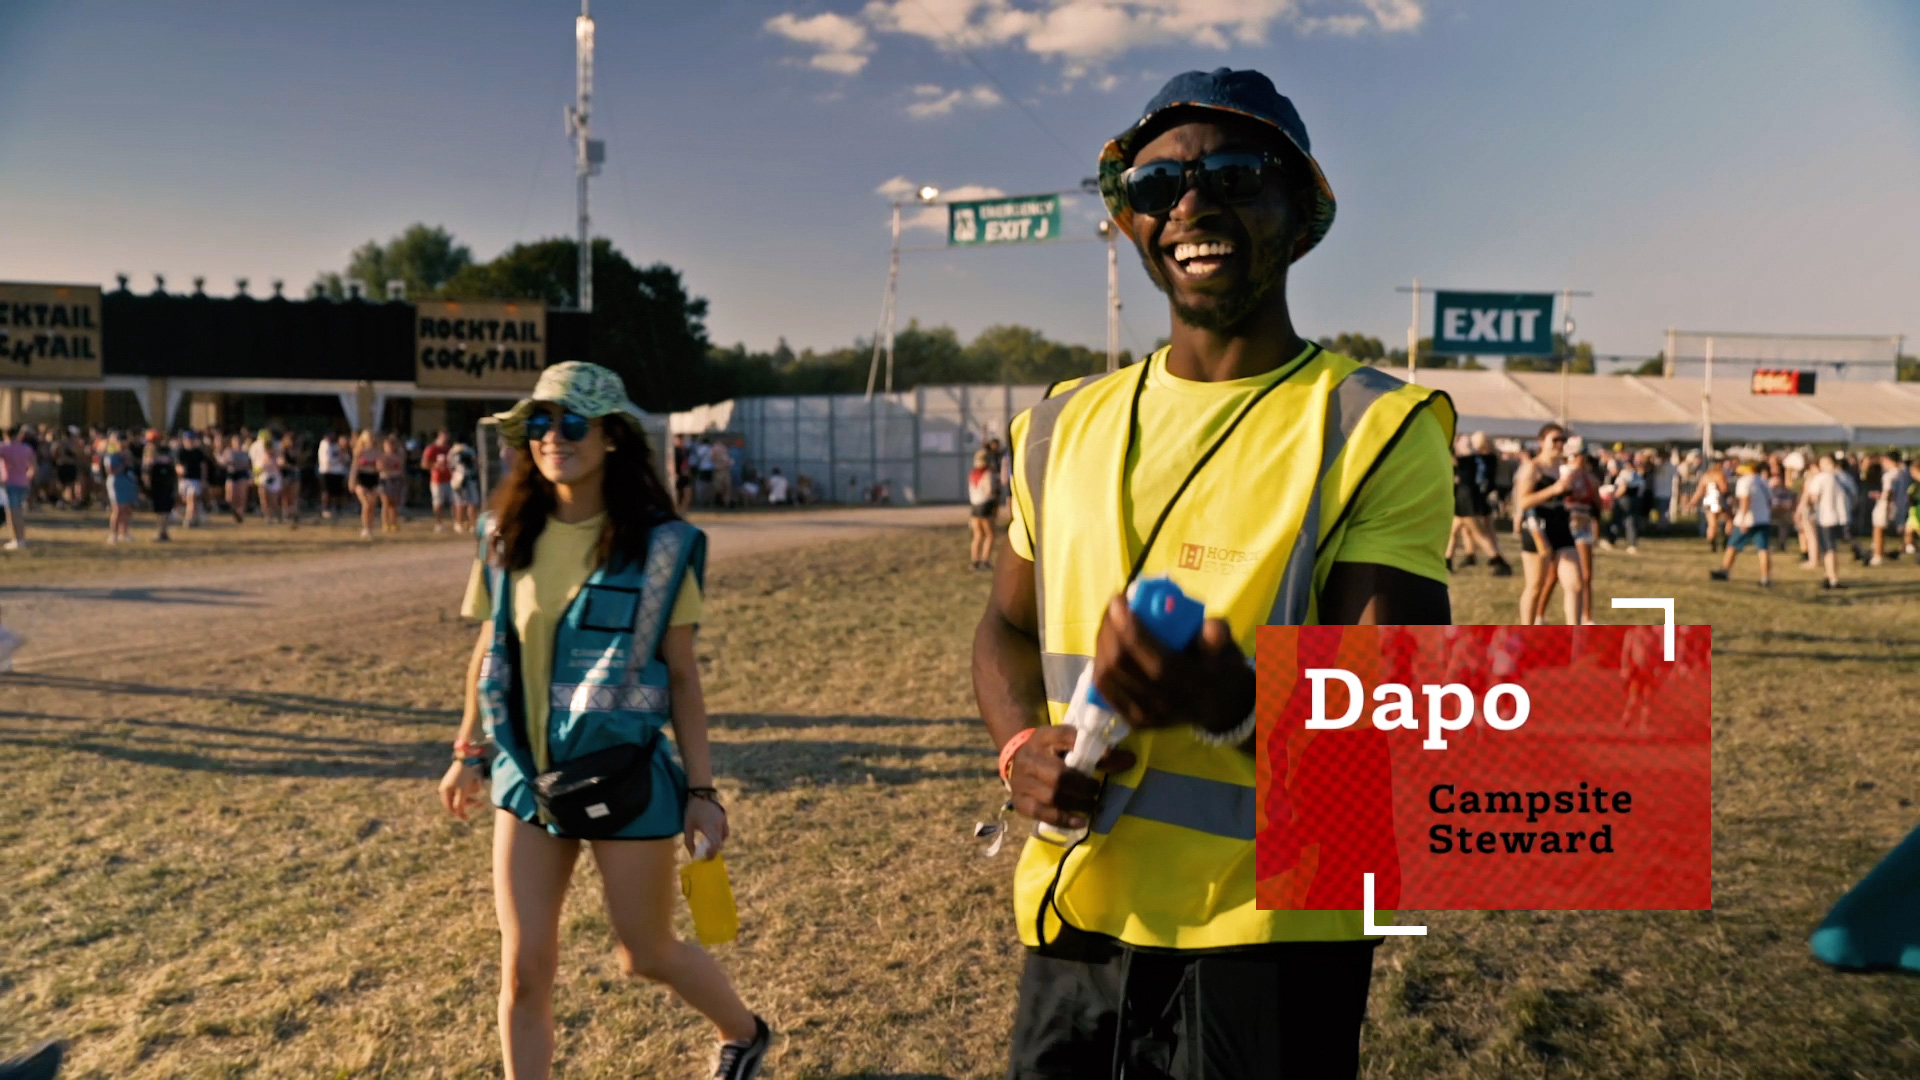 Dapo a Campsite Steward volunteering with Hotbox Events at Reading Festival!